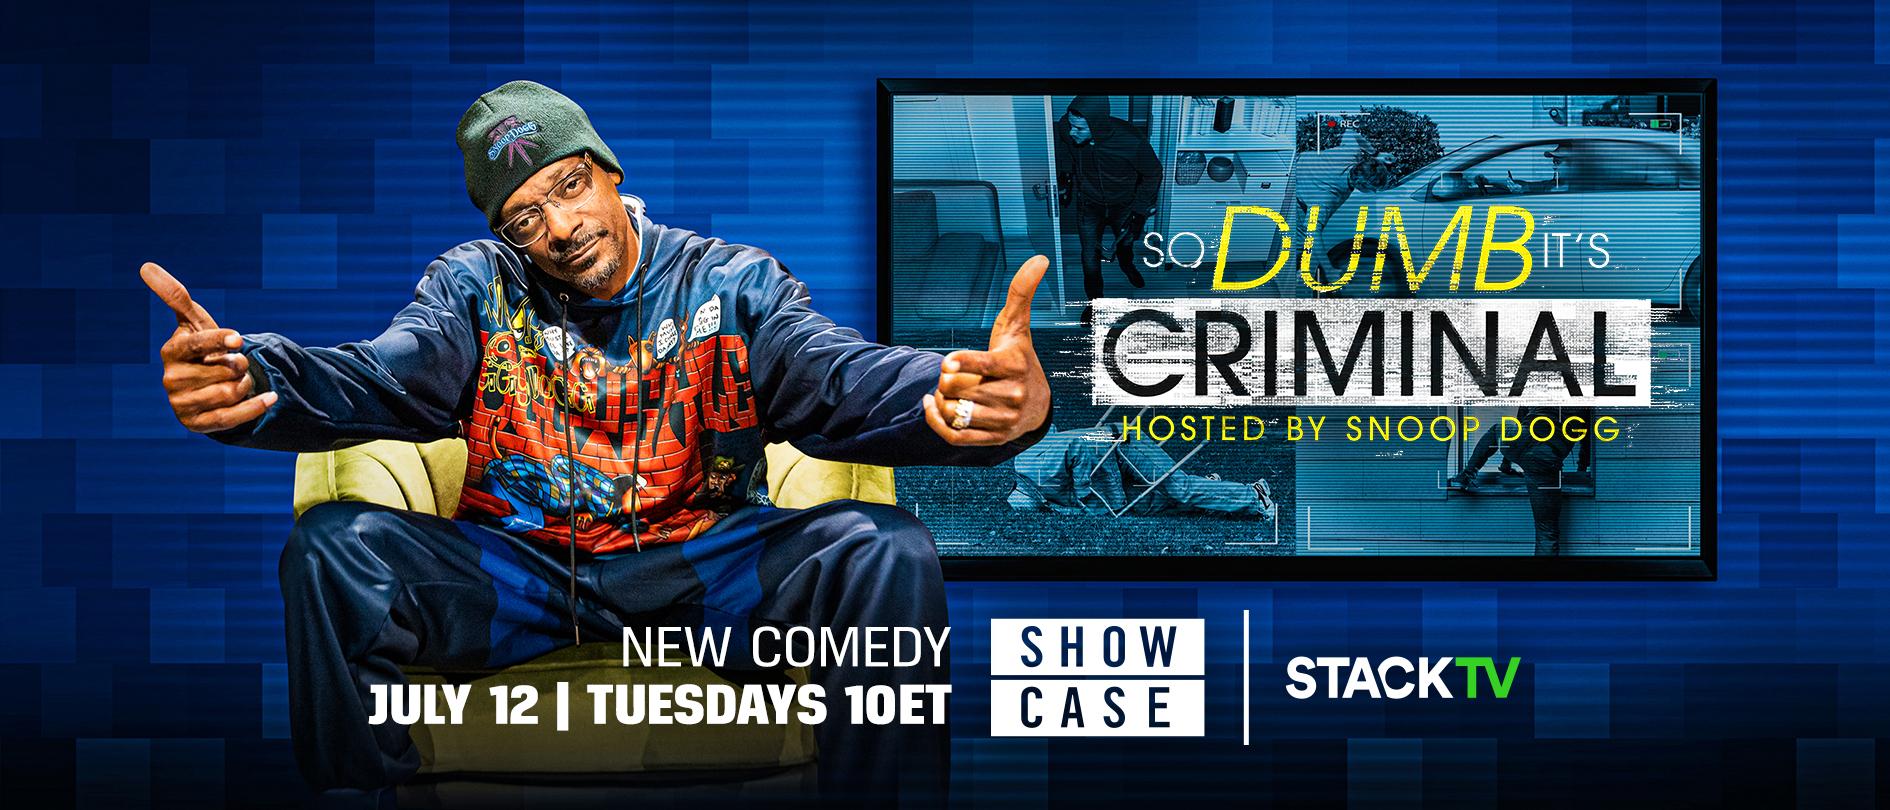 So Dumb It’s Criminal Hosted By Snoop Dogg